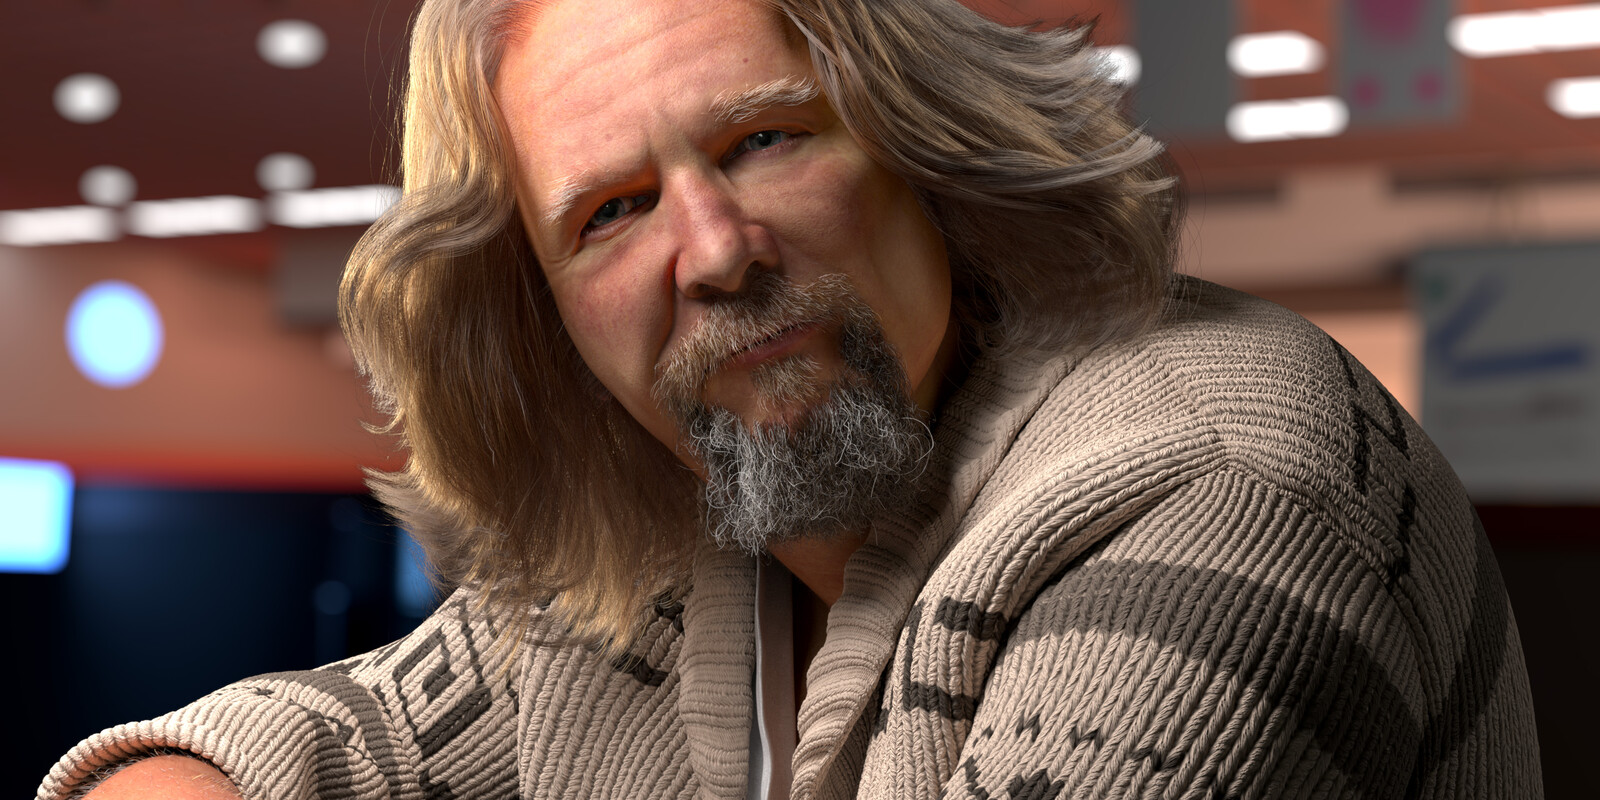 The Dude Abides - Final Image